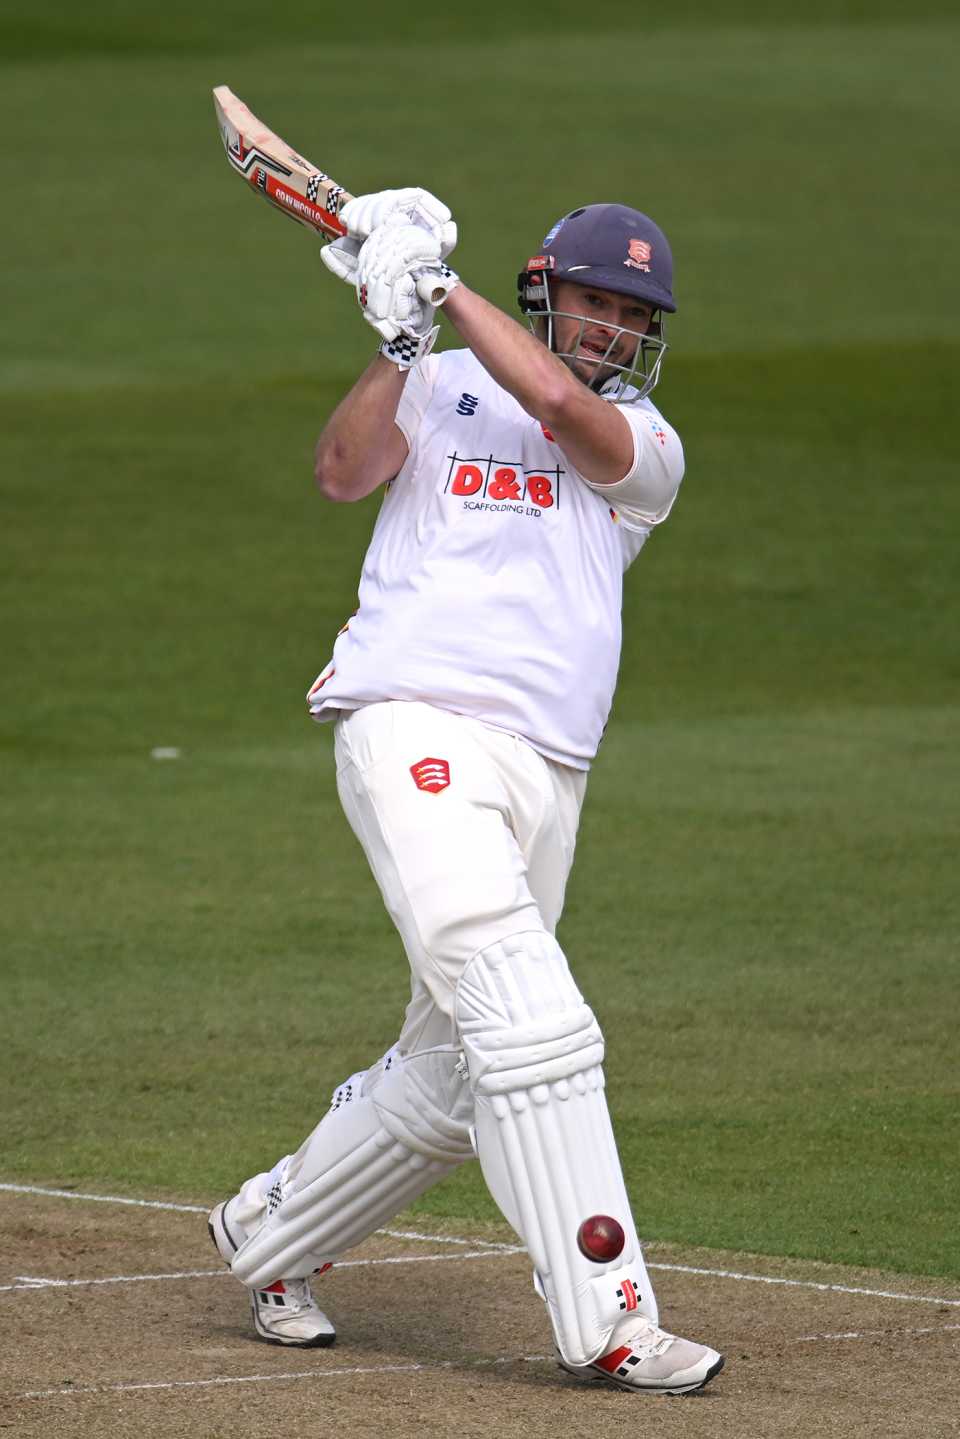 Nick Browne reached his century